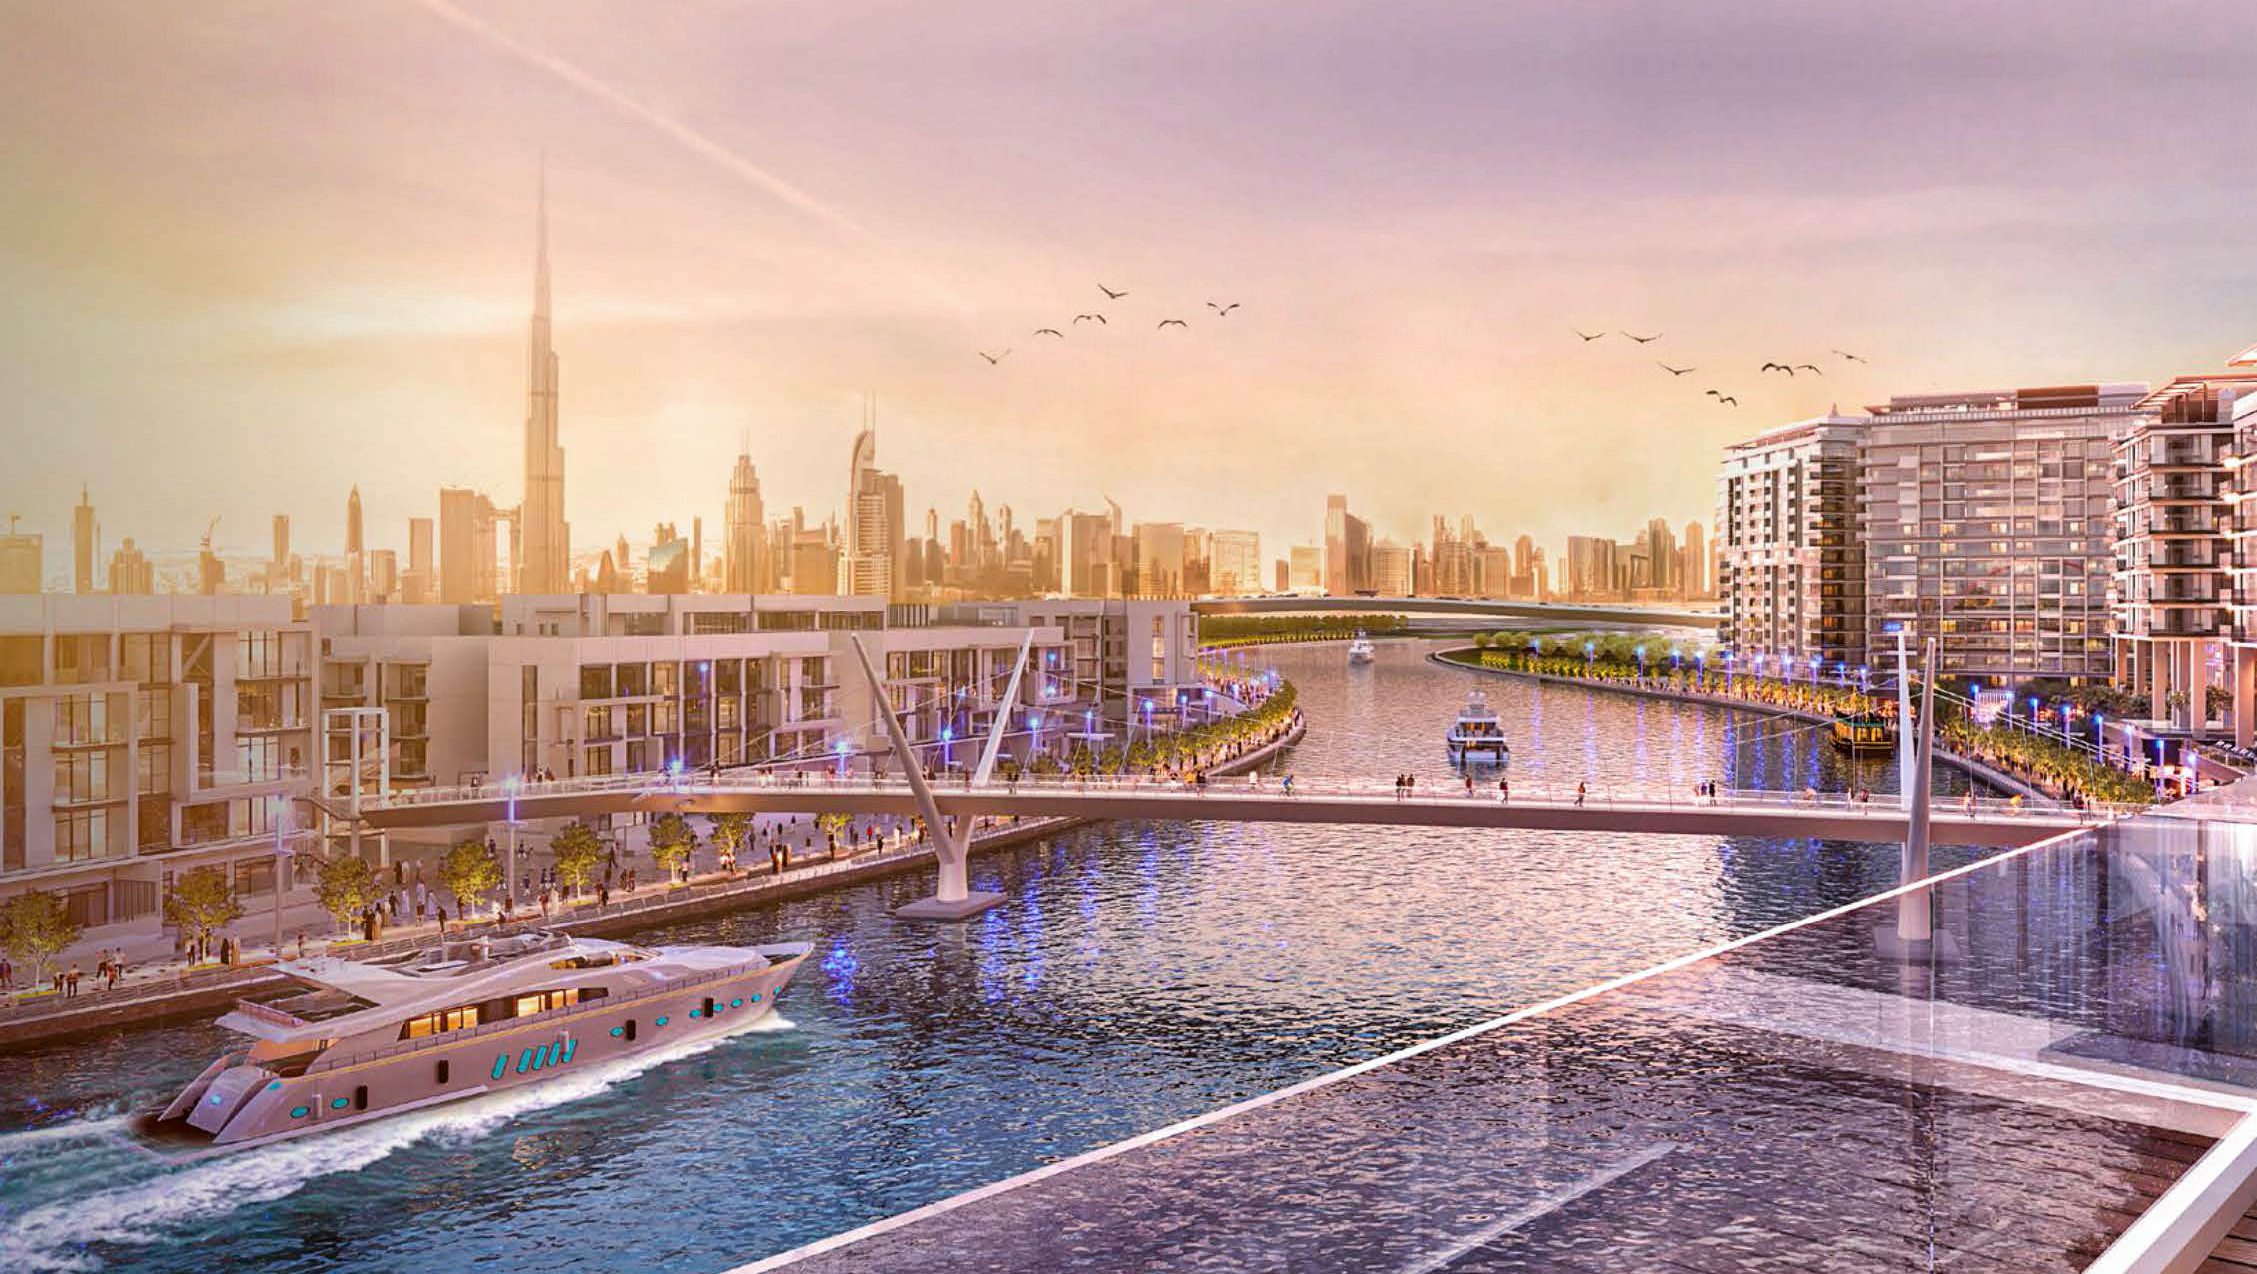 Dubai Water Canal: Everything you should know about